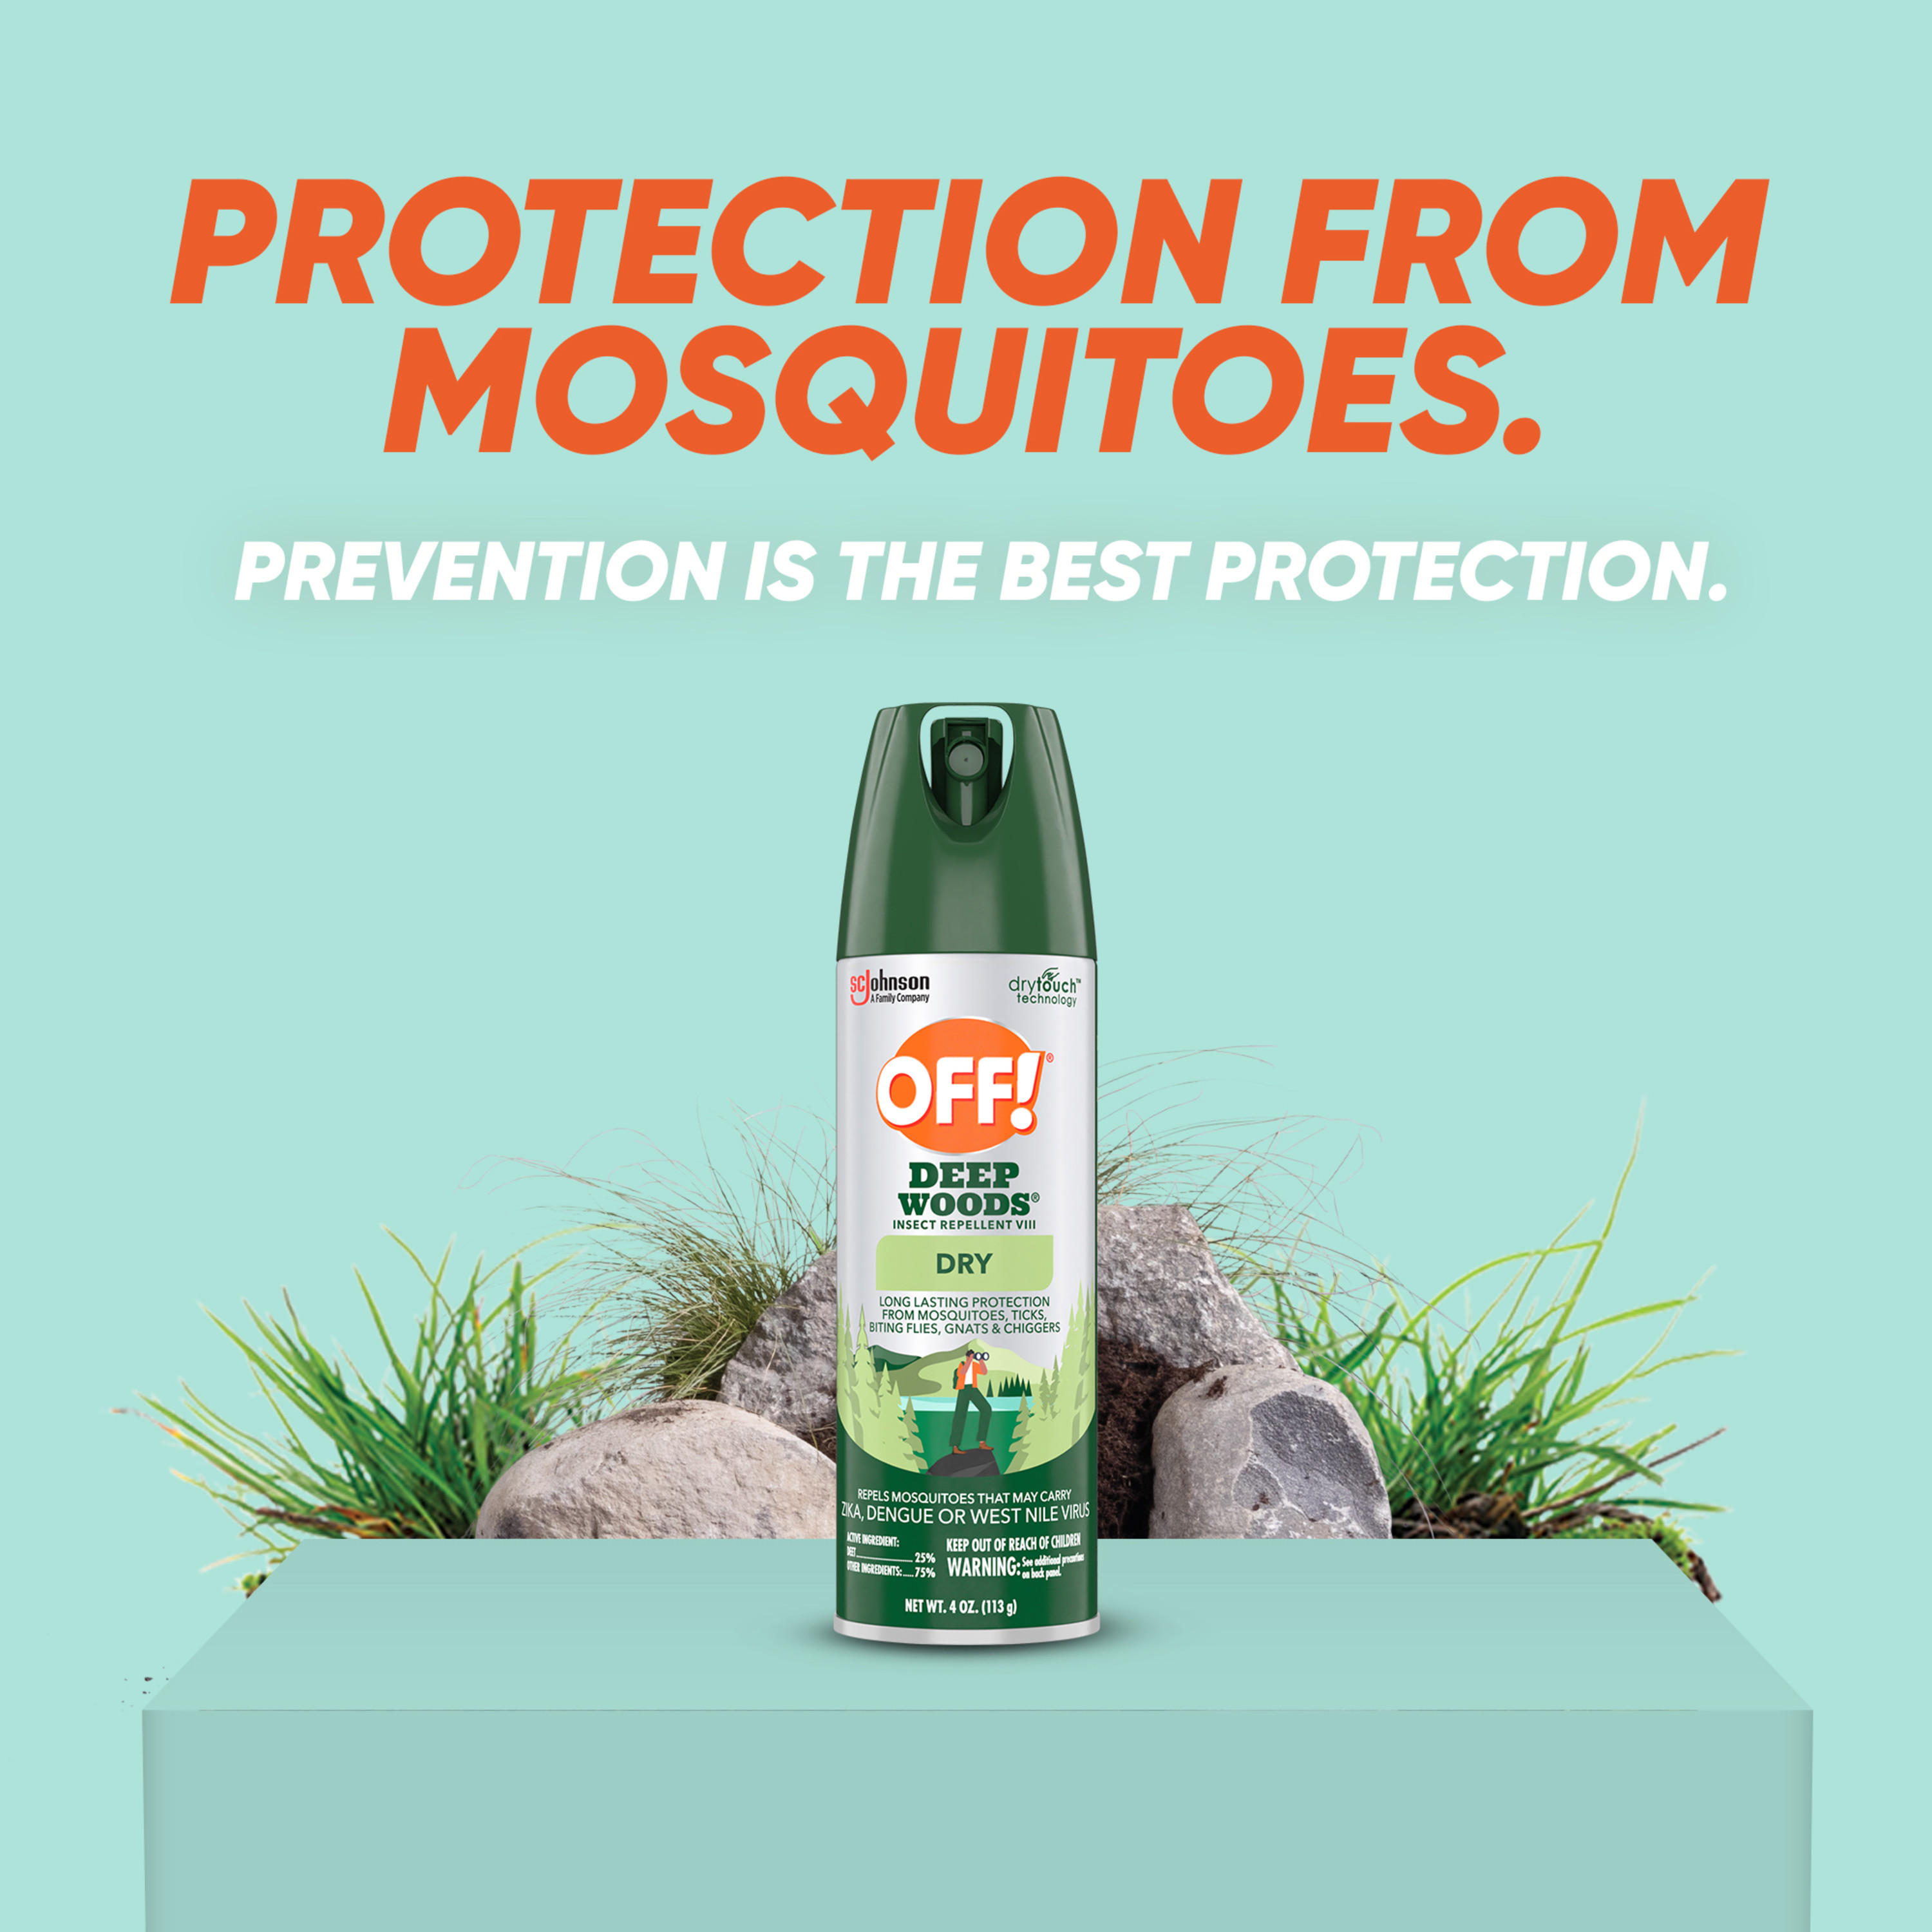 OFF! Deep Woods Dry Insect Repellent VIII, up to 8 Hour Mosquito Protection, 4 oz, 4 Count - image 3 of 17